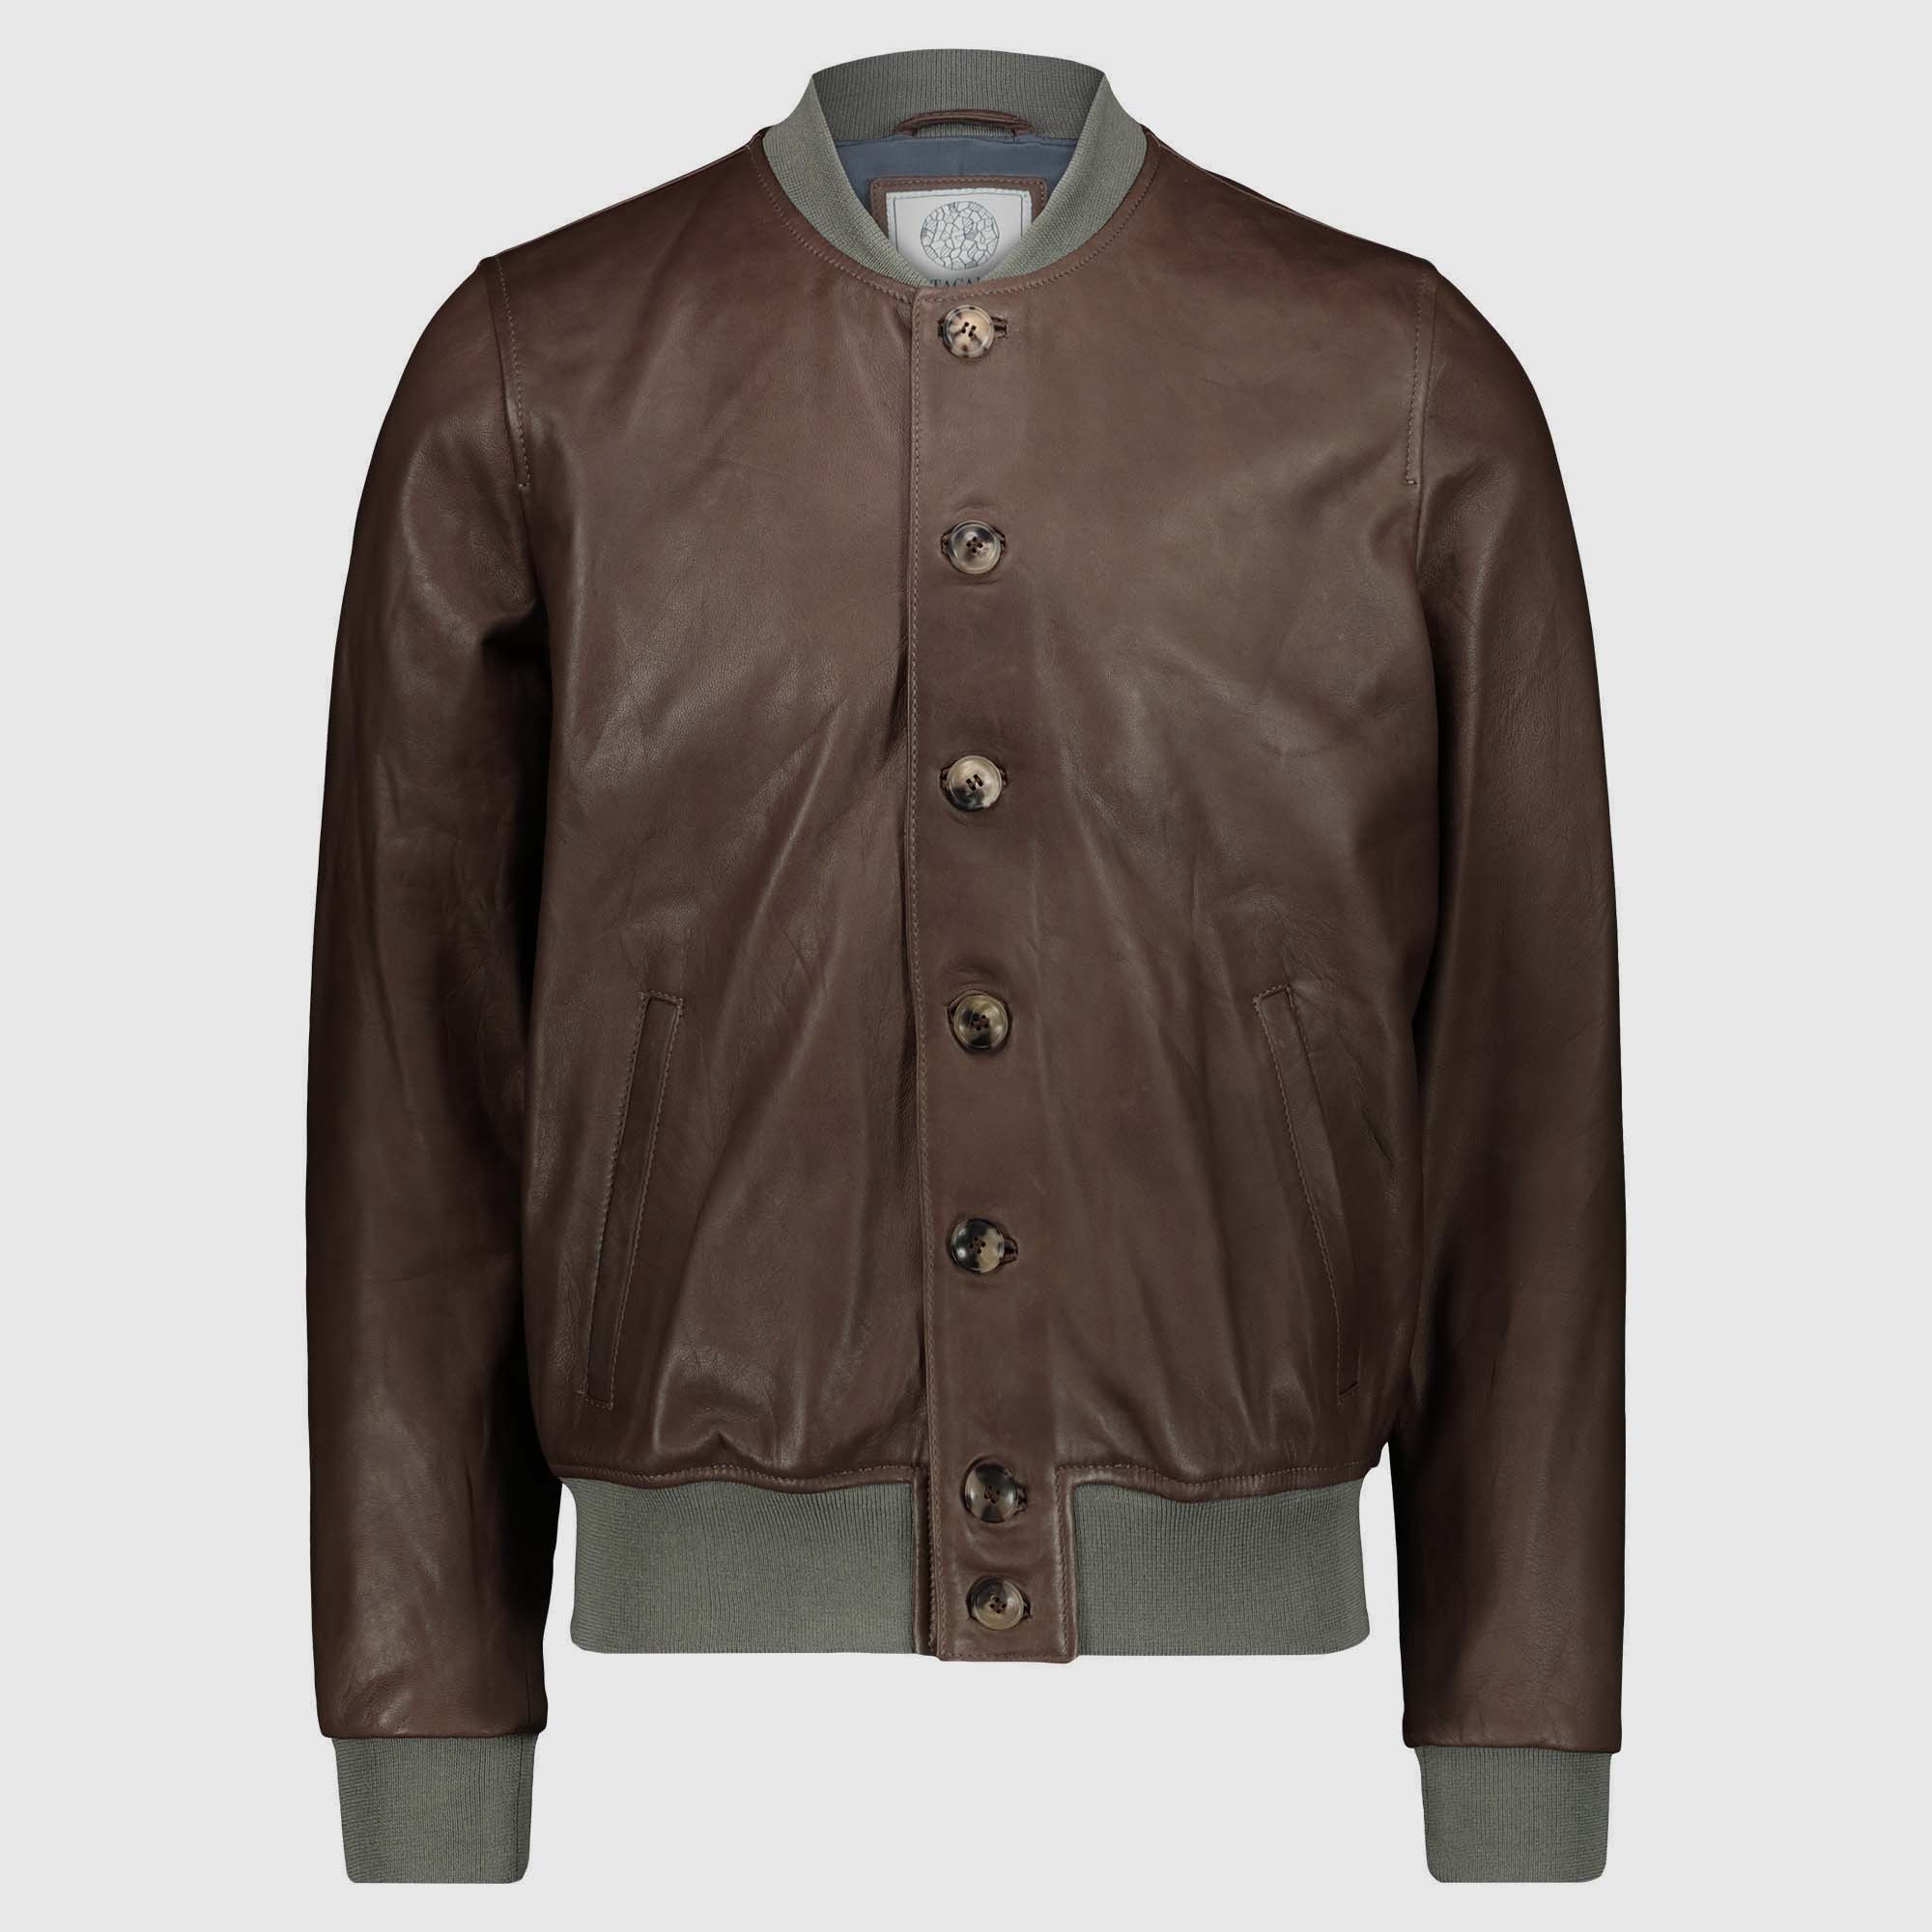 Bomber jacket in a brown natural leather –